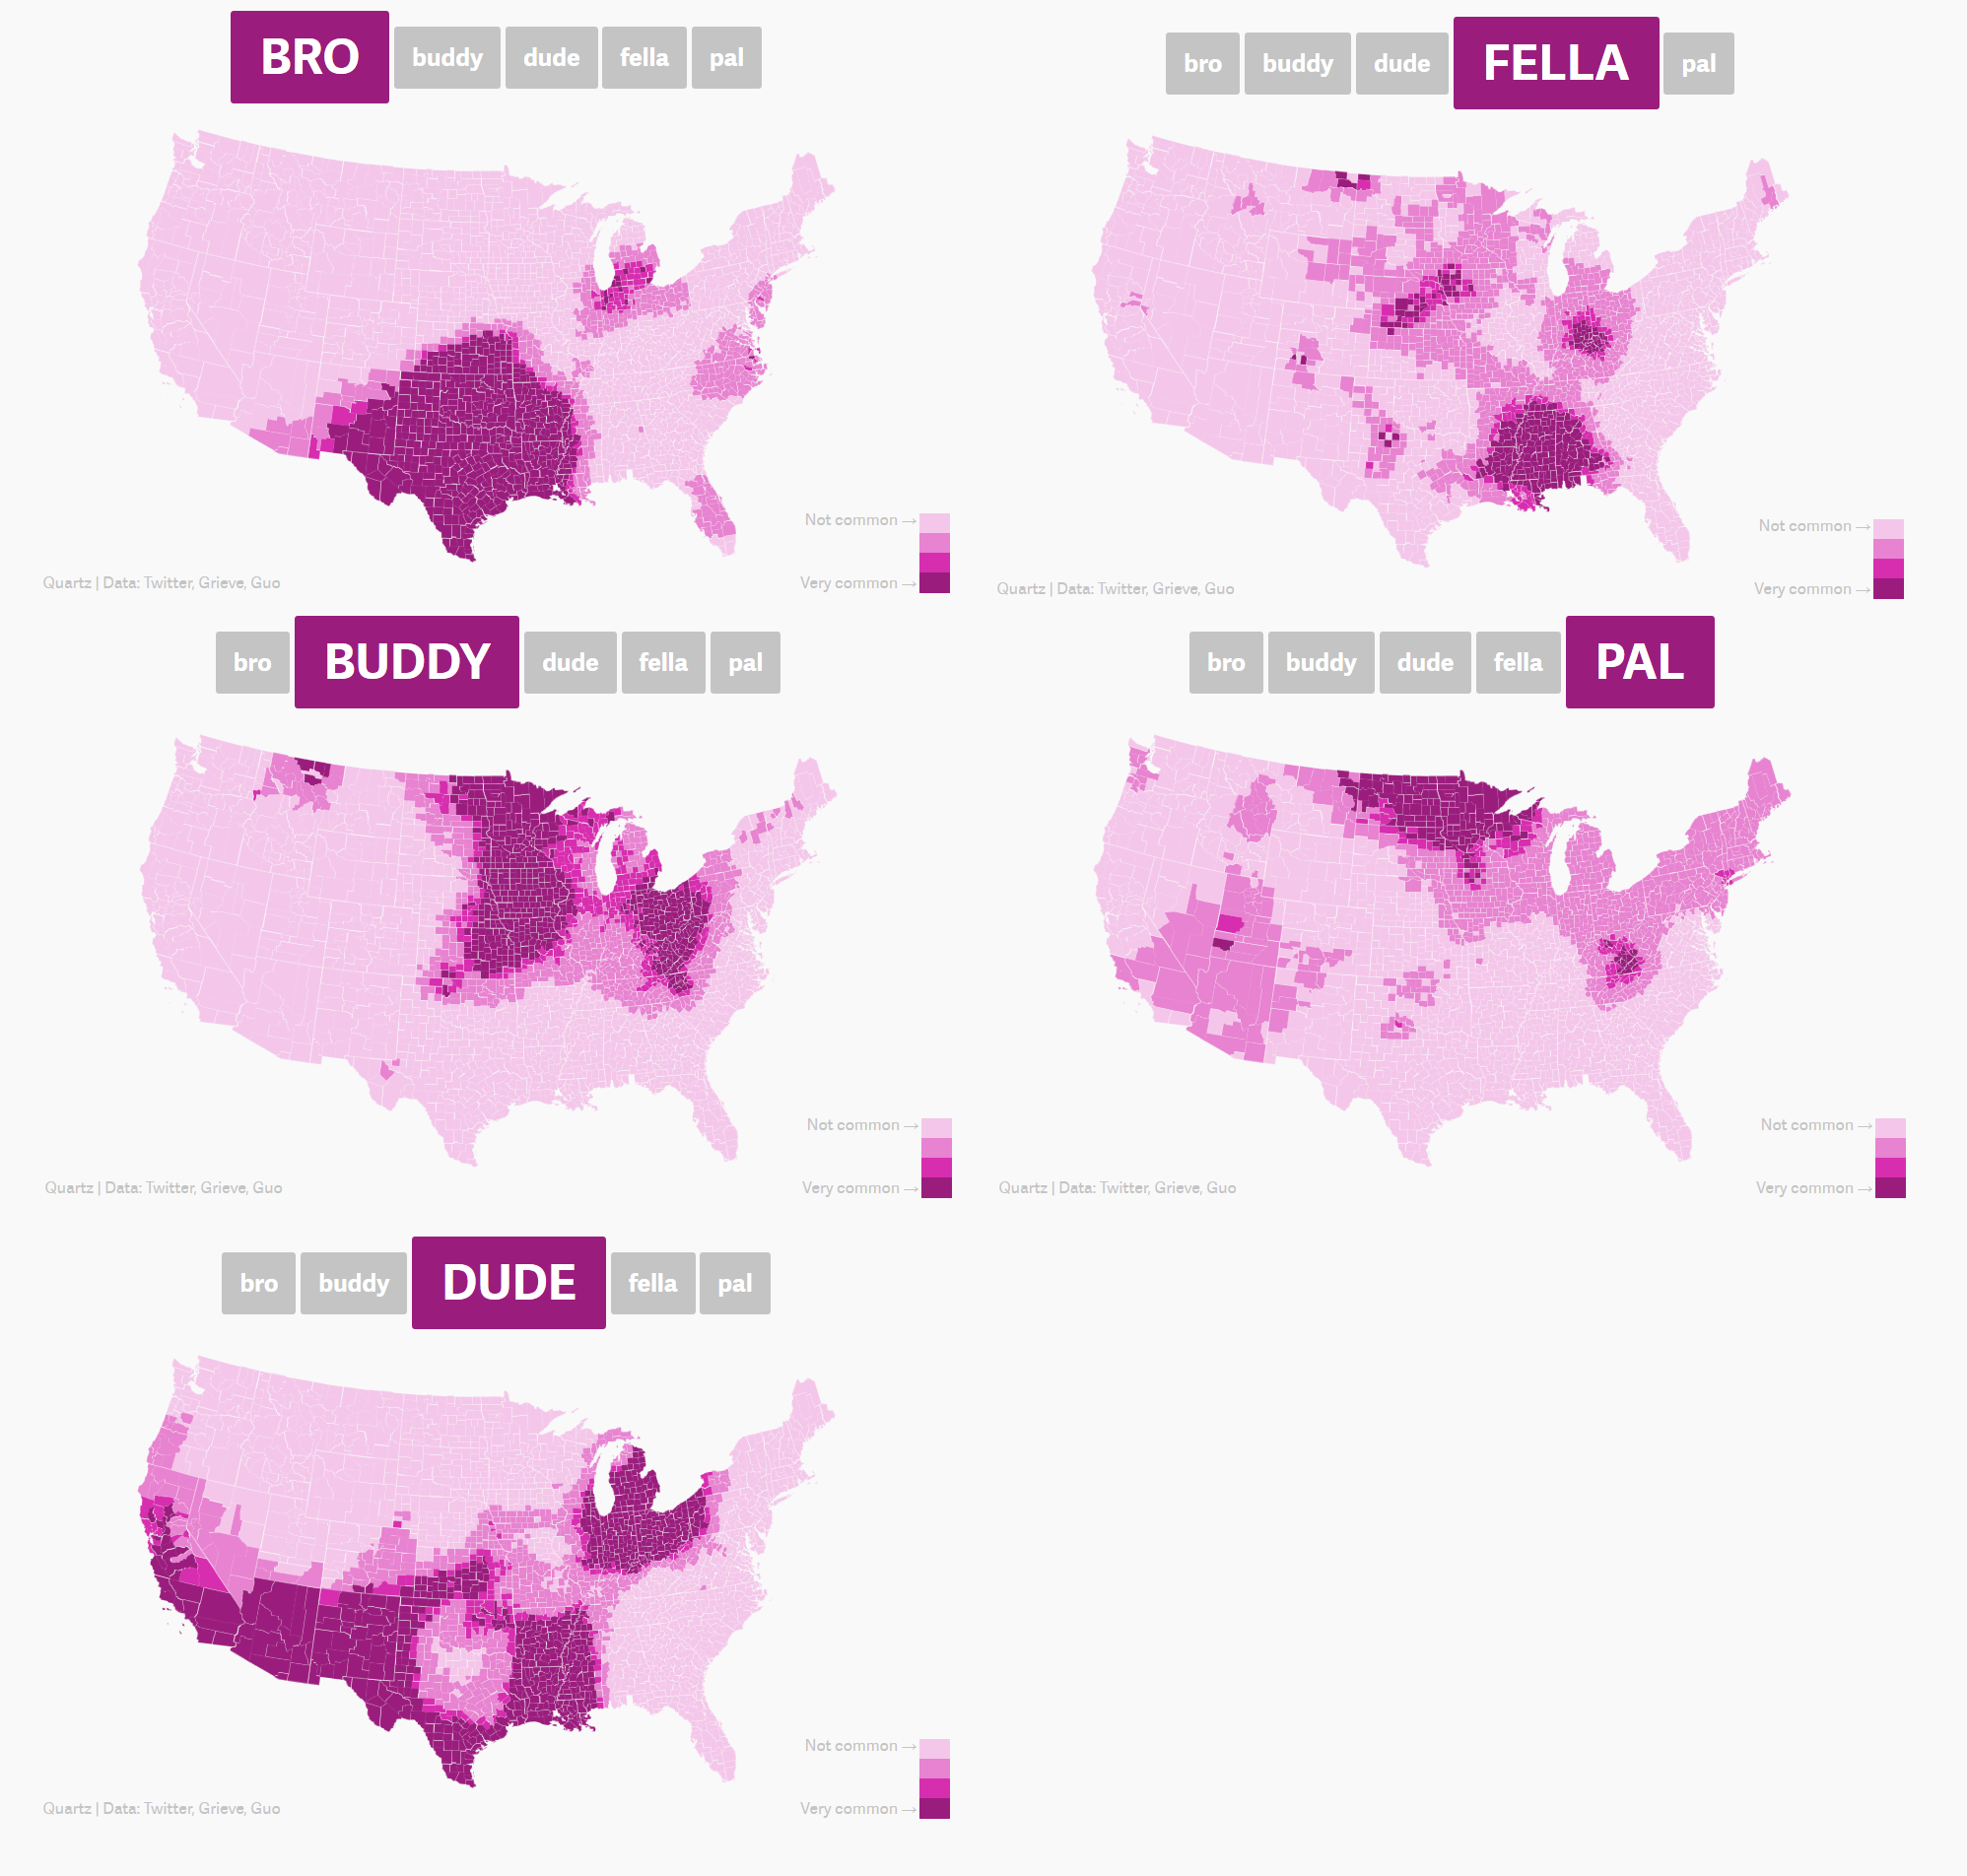 The dude map: How American men refer to their bros